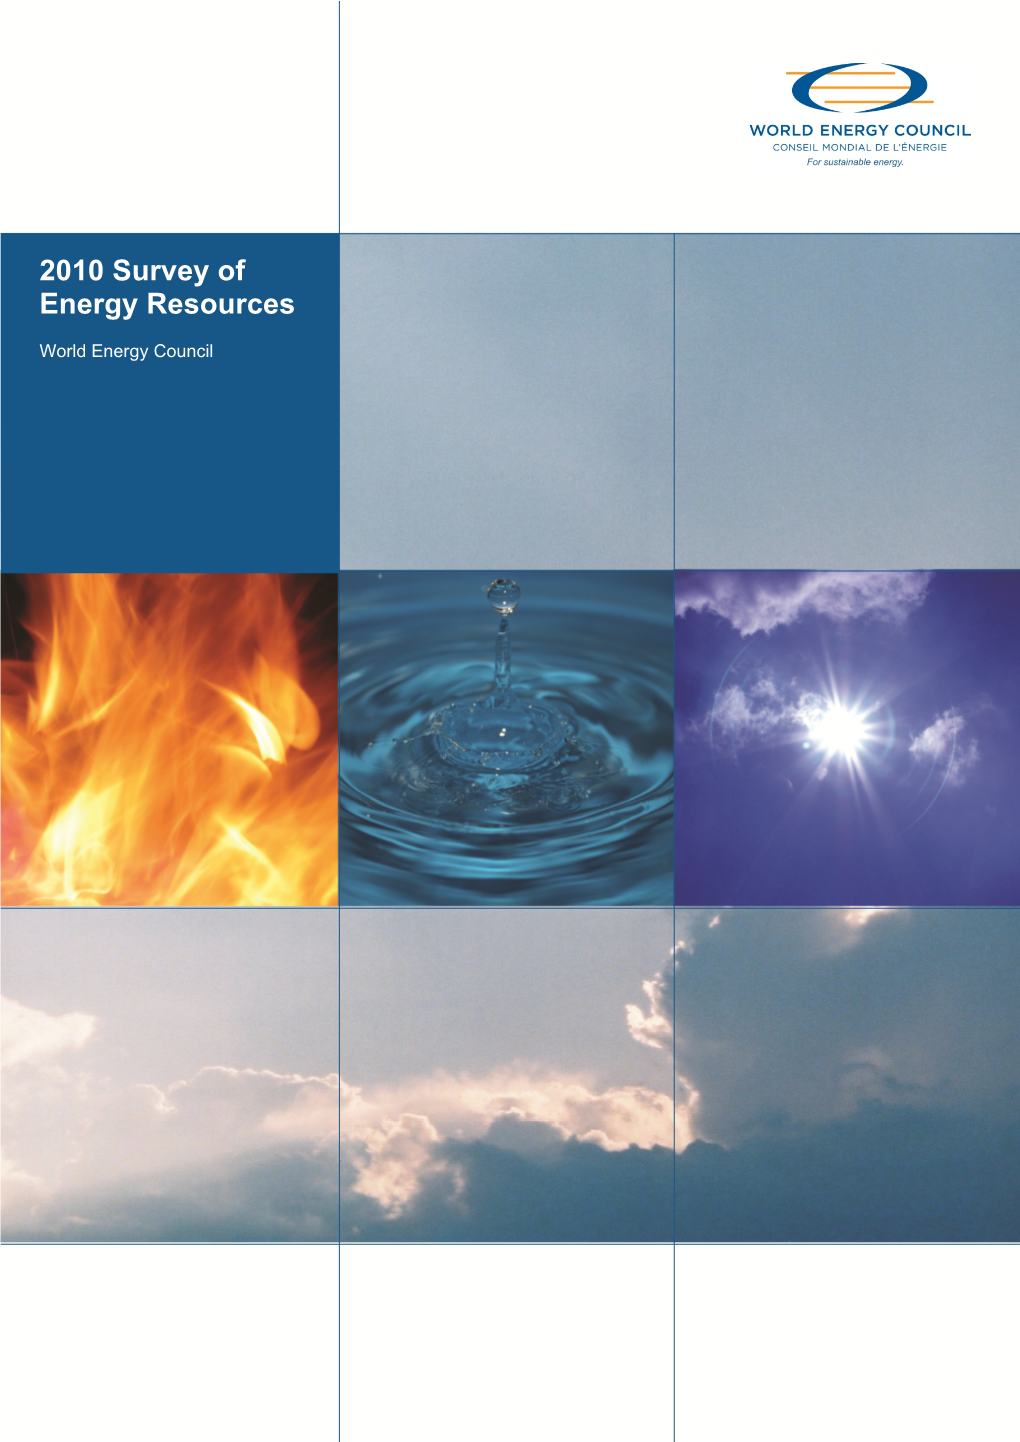 2010 Survey of Energy Resources